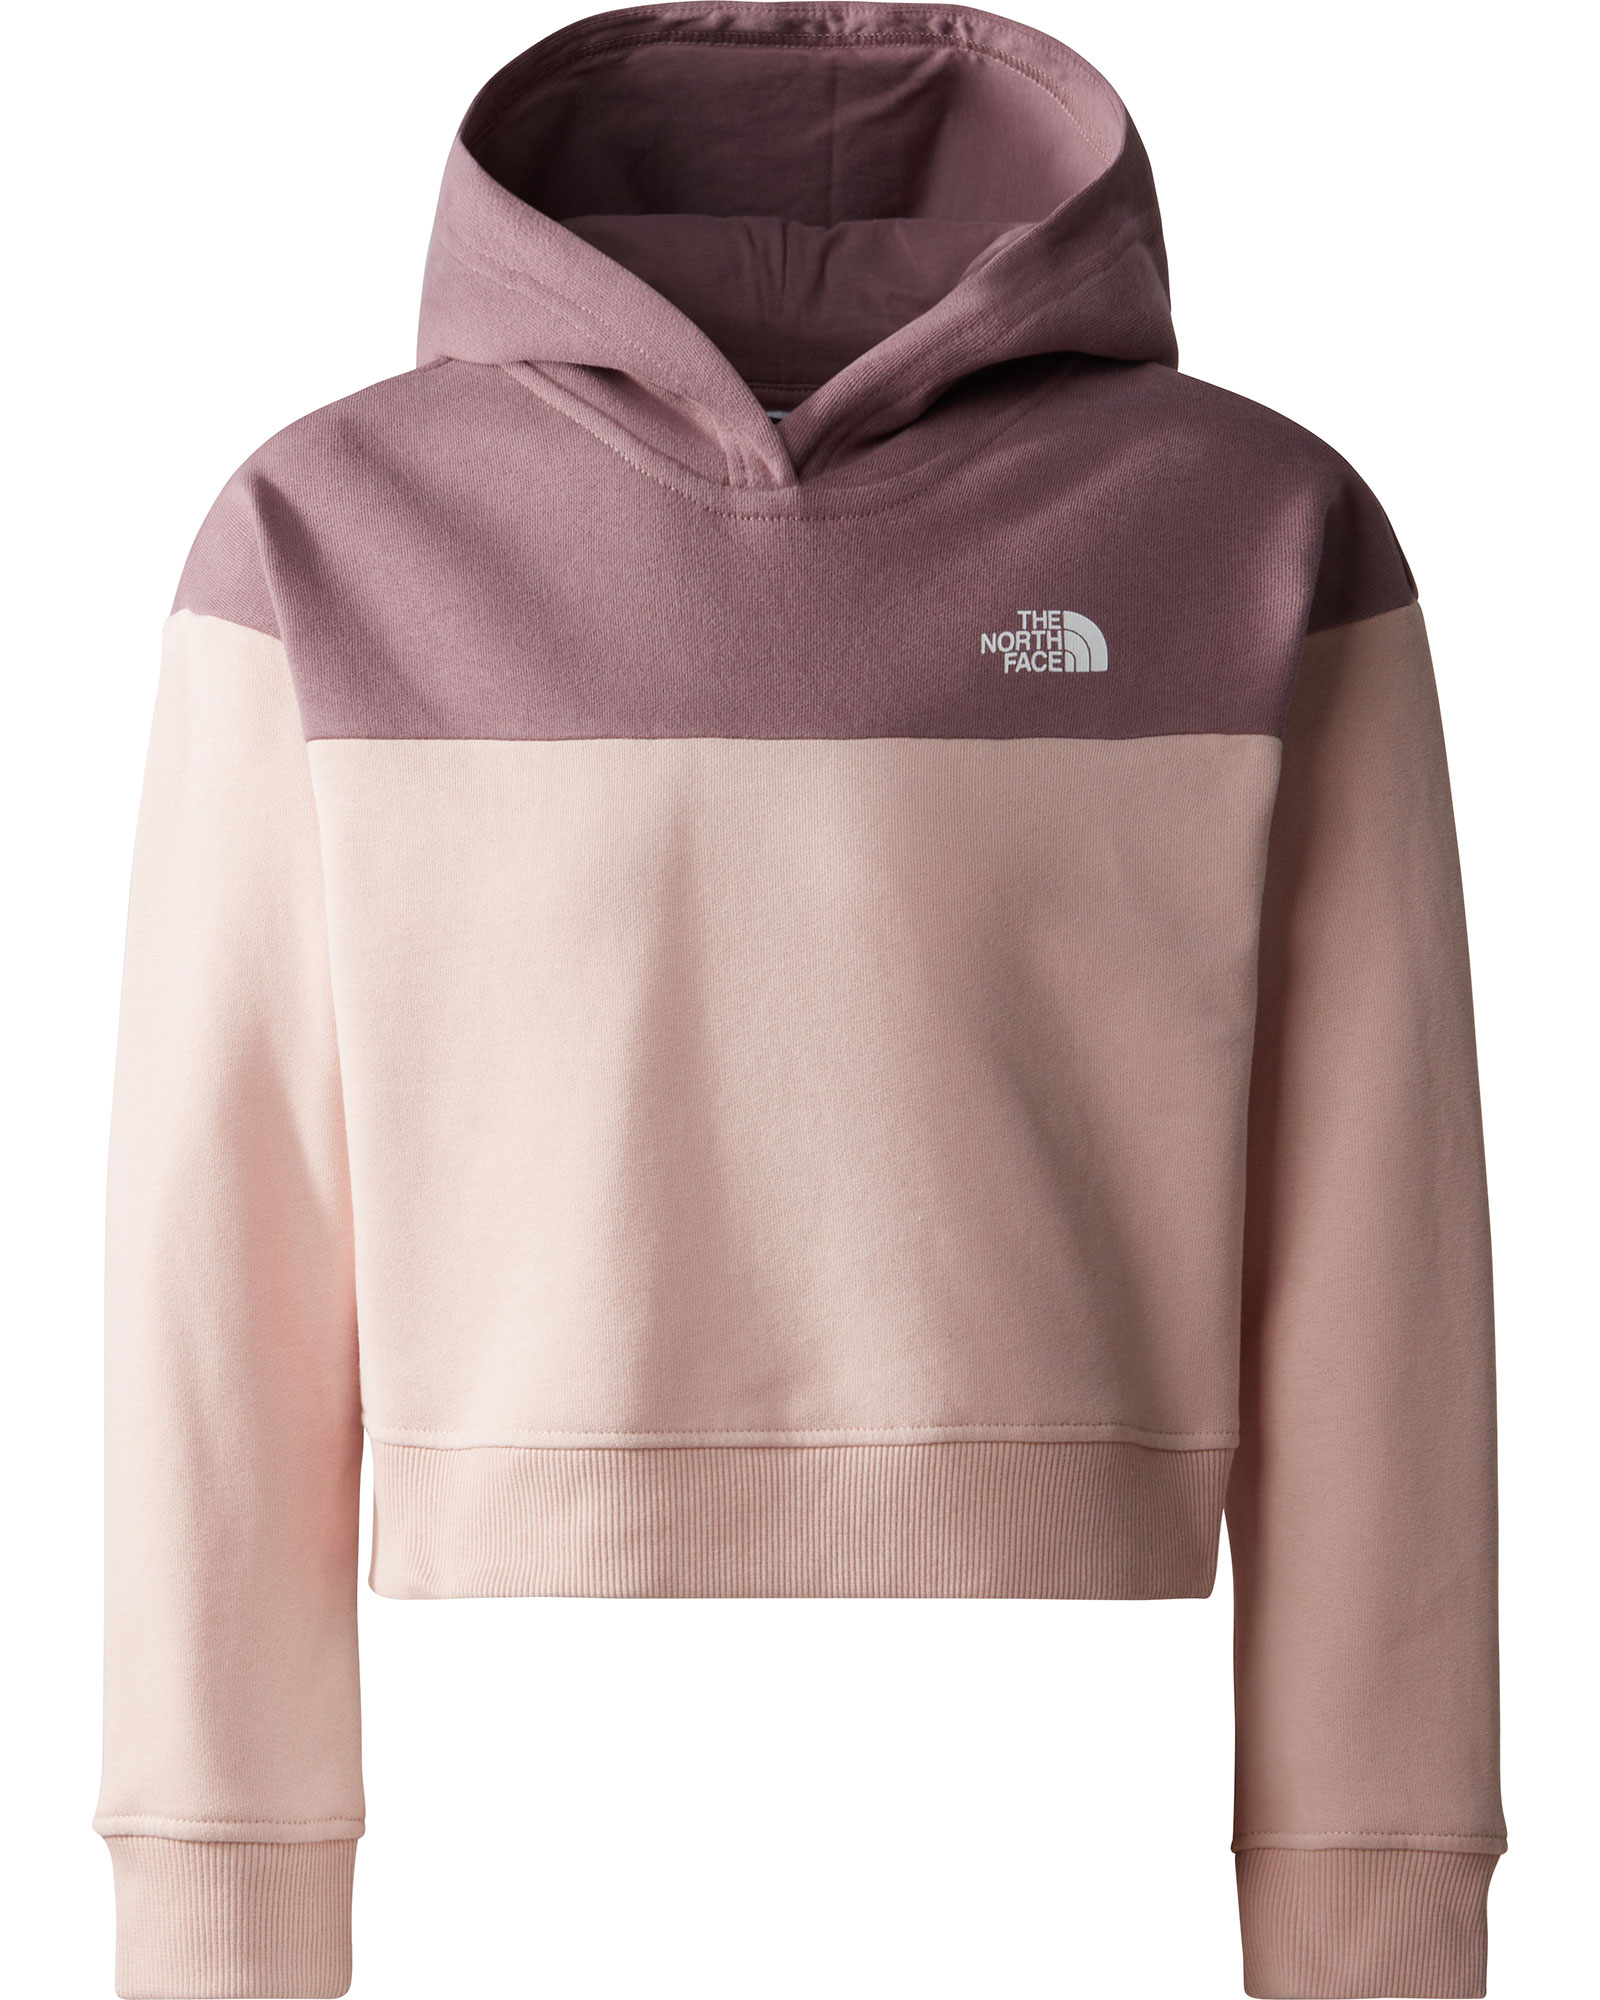 The North Face Girl’s Drew Peak Crop P/O Hoodie - Pink Moss-Fawn Grey S